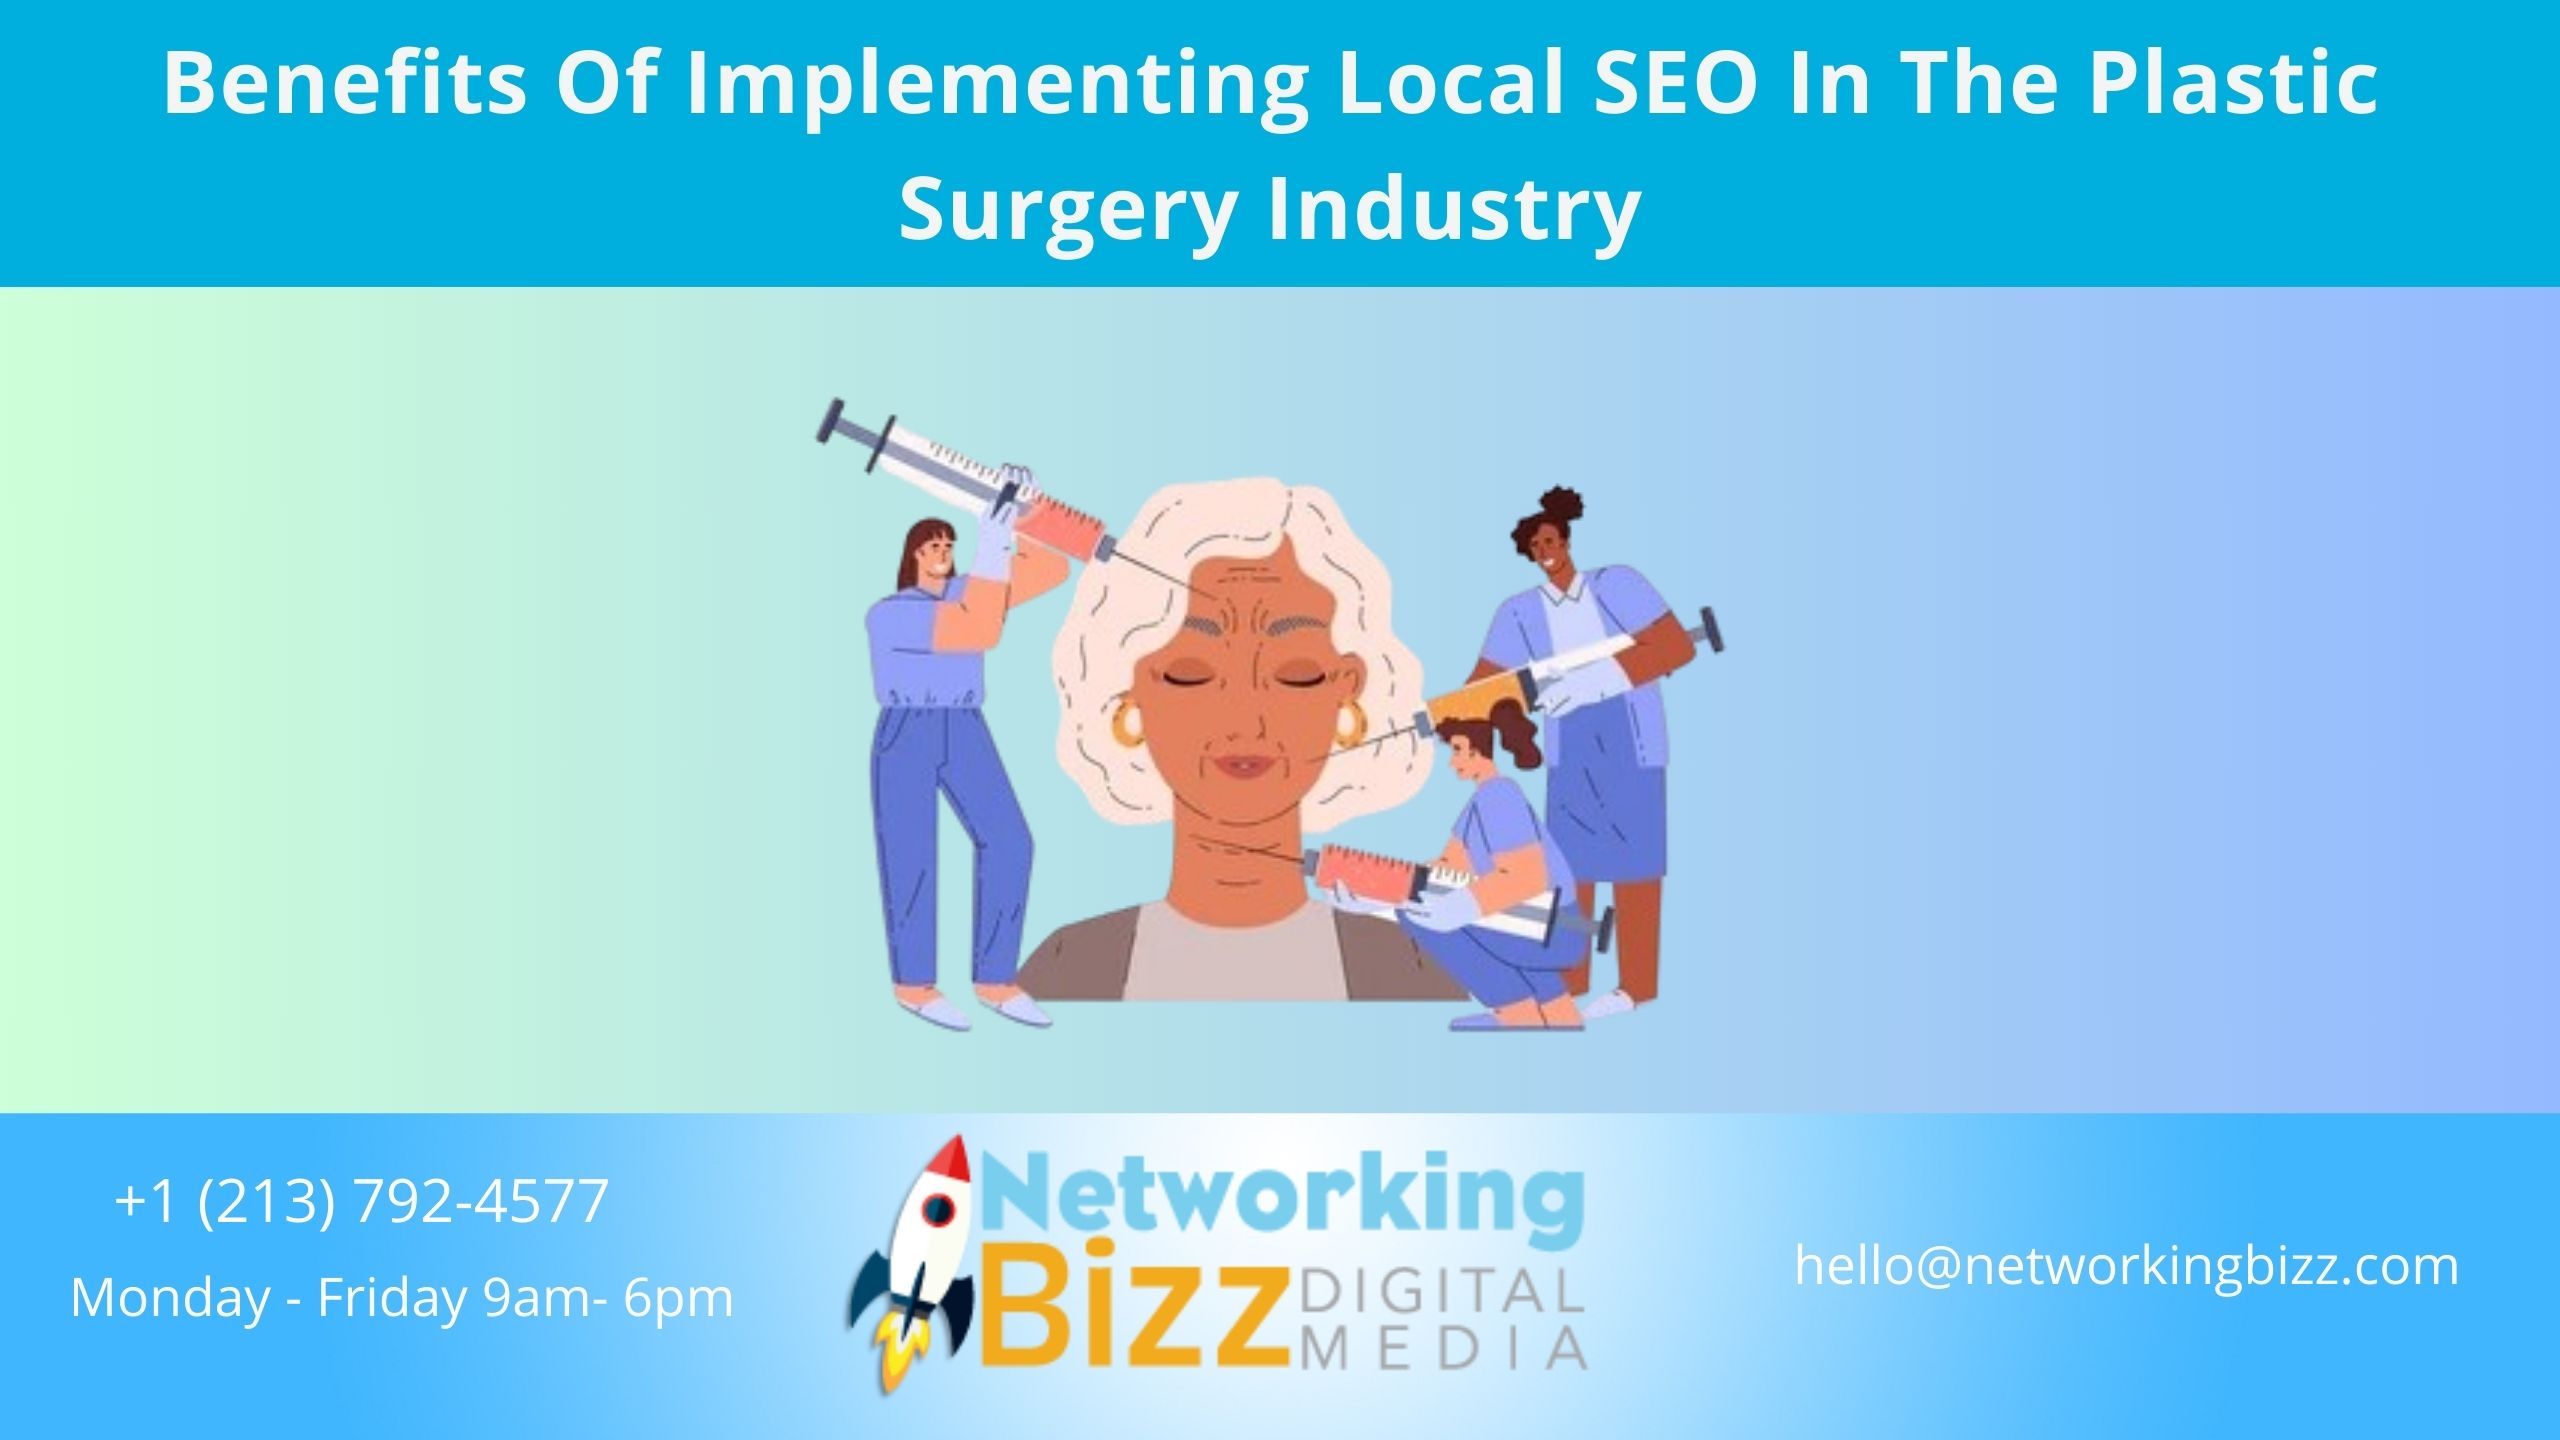 Benefits Of Implementing Local SEO In The Plastic Surgery Industry